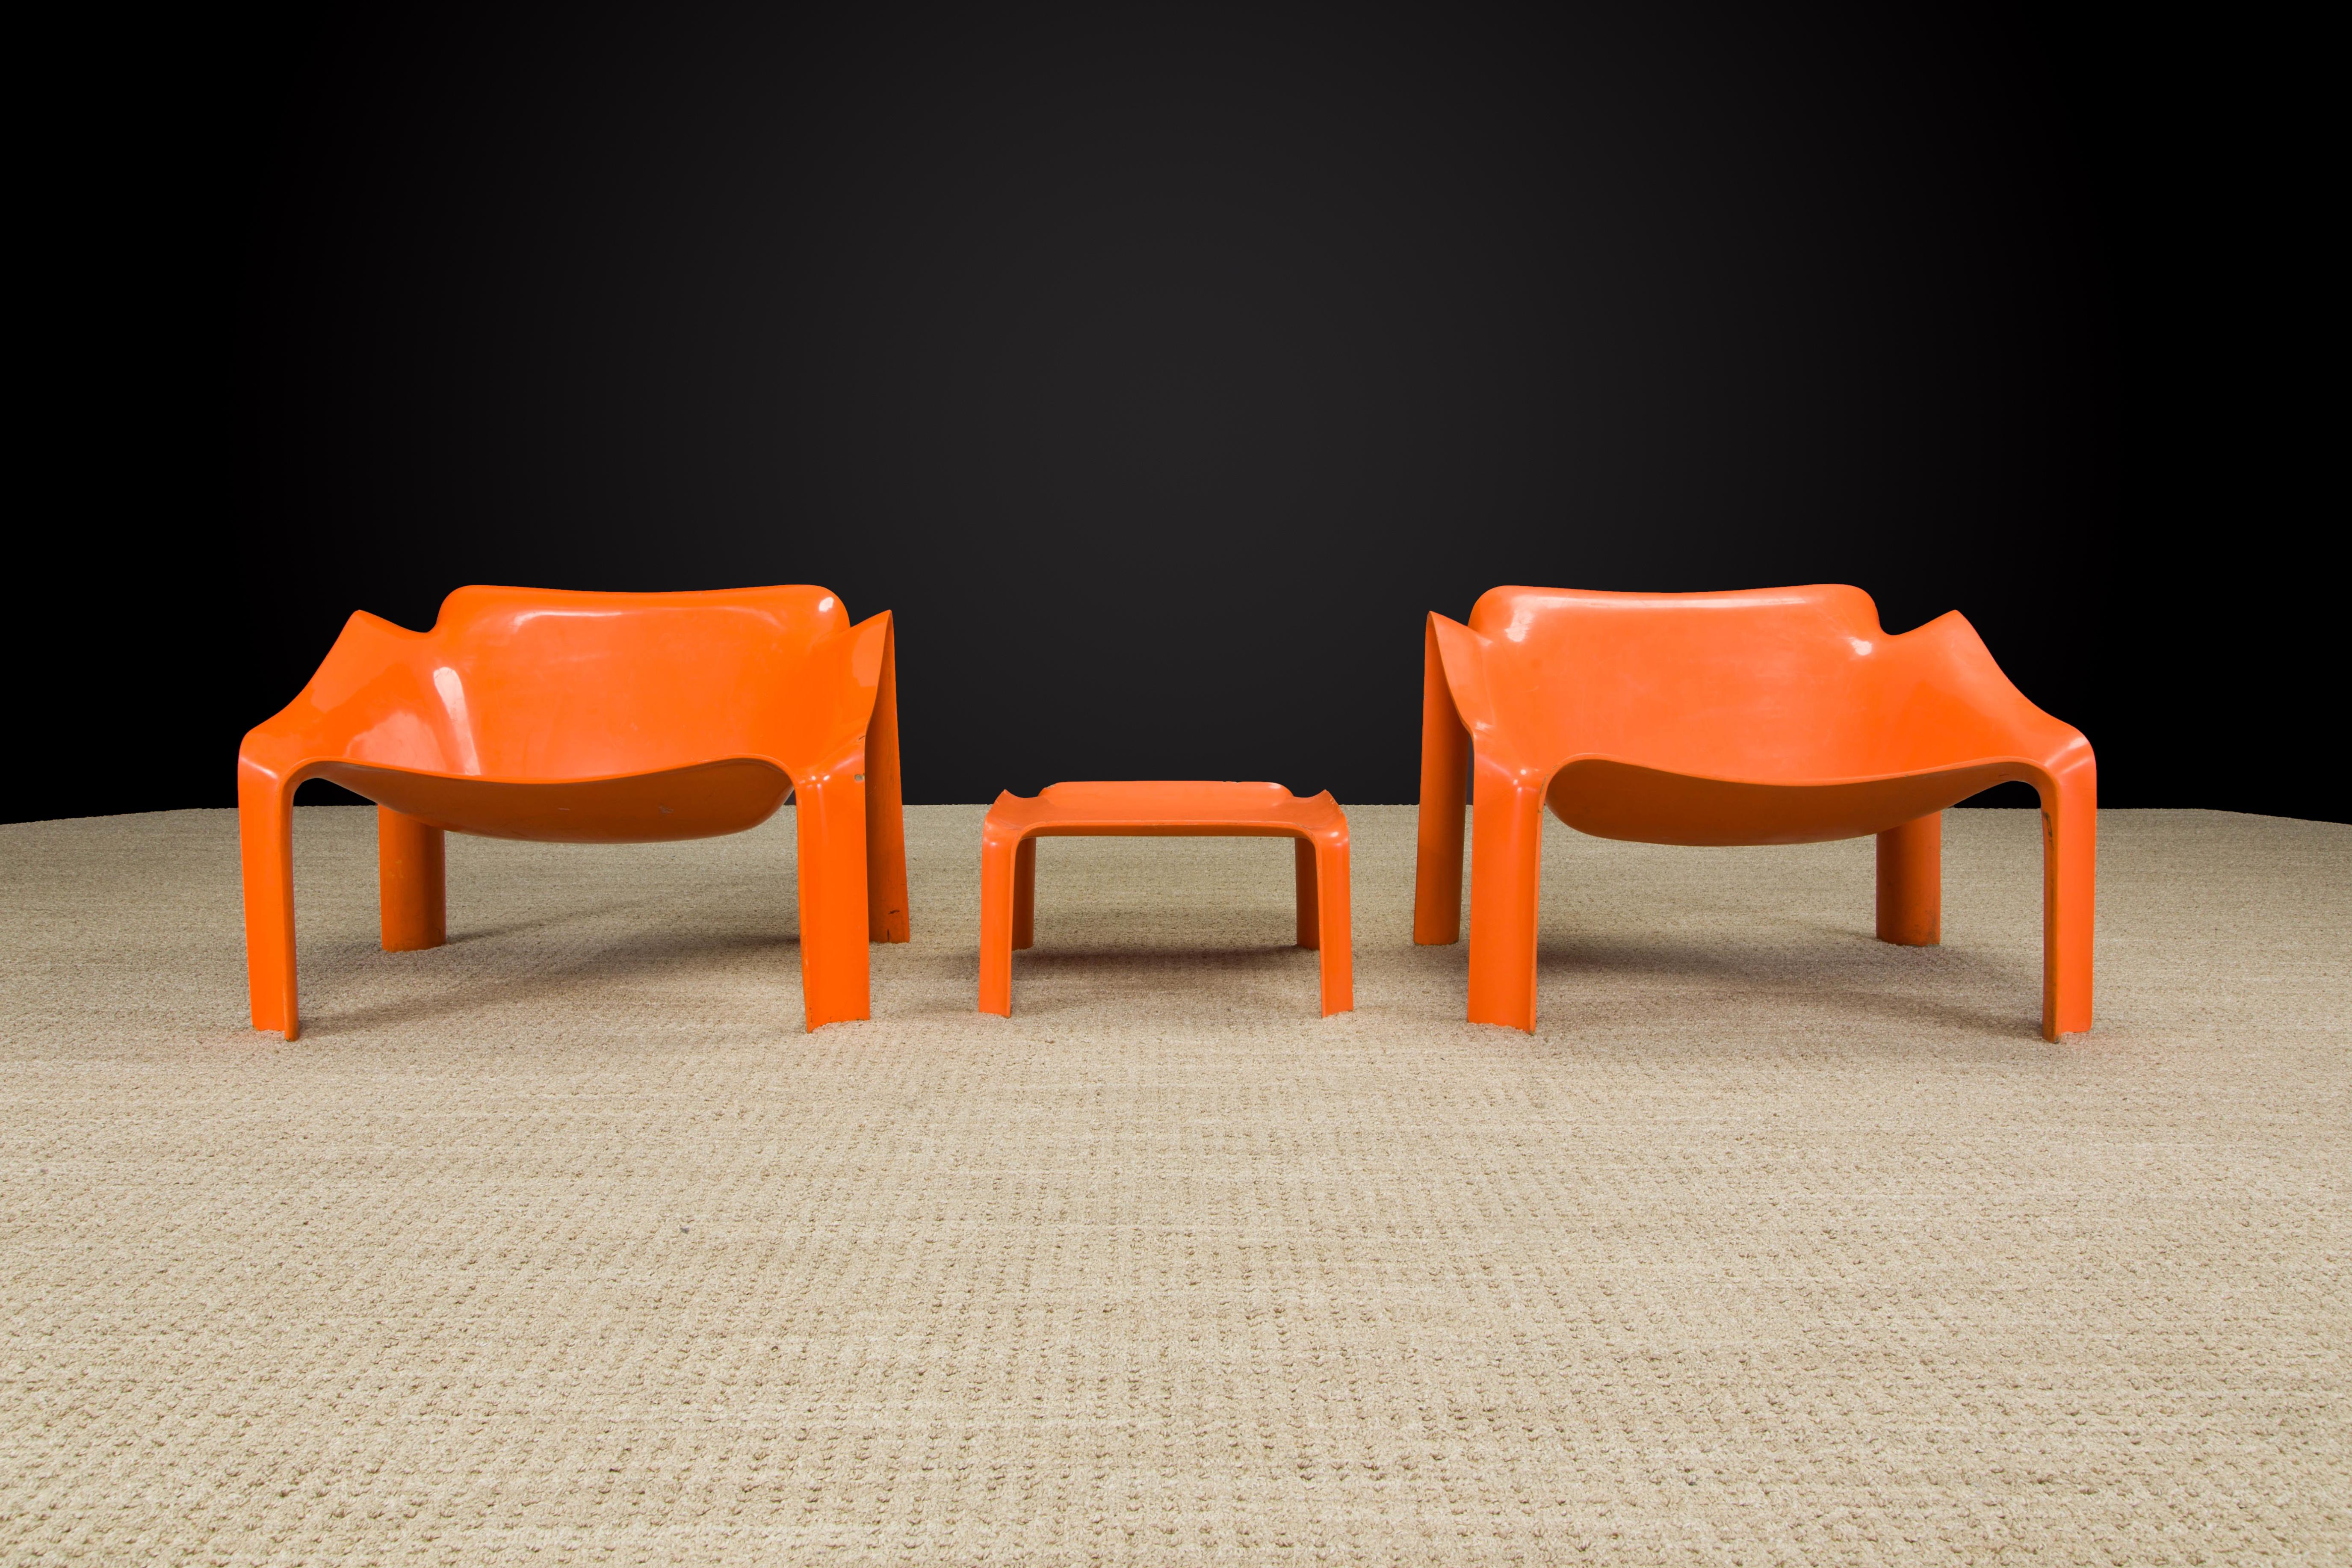 This rare set of Model 'F303' lounge chairs (2) and side table (1) by Pierre Paulin for Artifort was designed and produced in the 1970s and still an icon of 70s modern design to this day. 

Crafted with a hard polyurethane molded shell which is